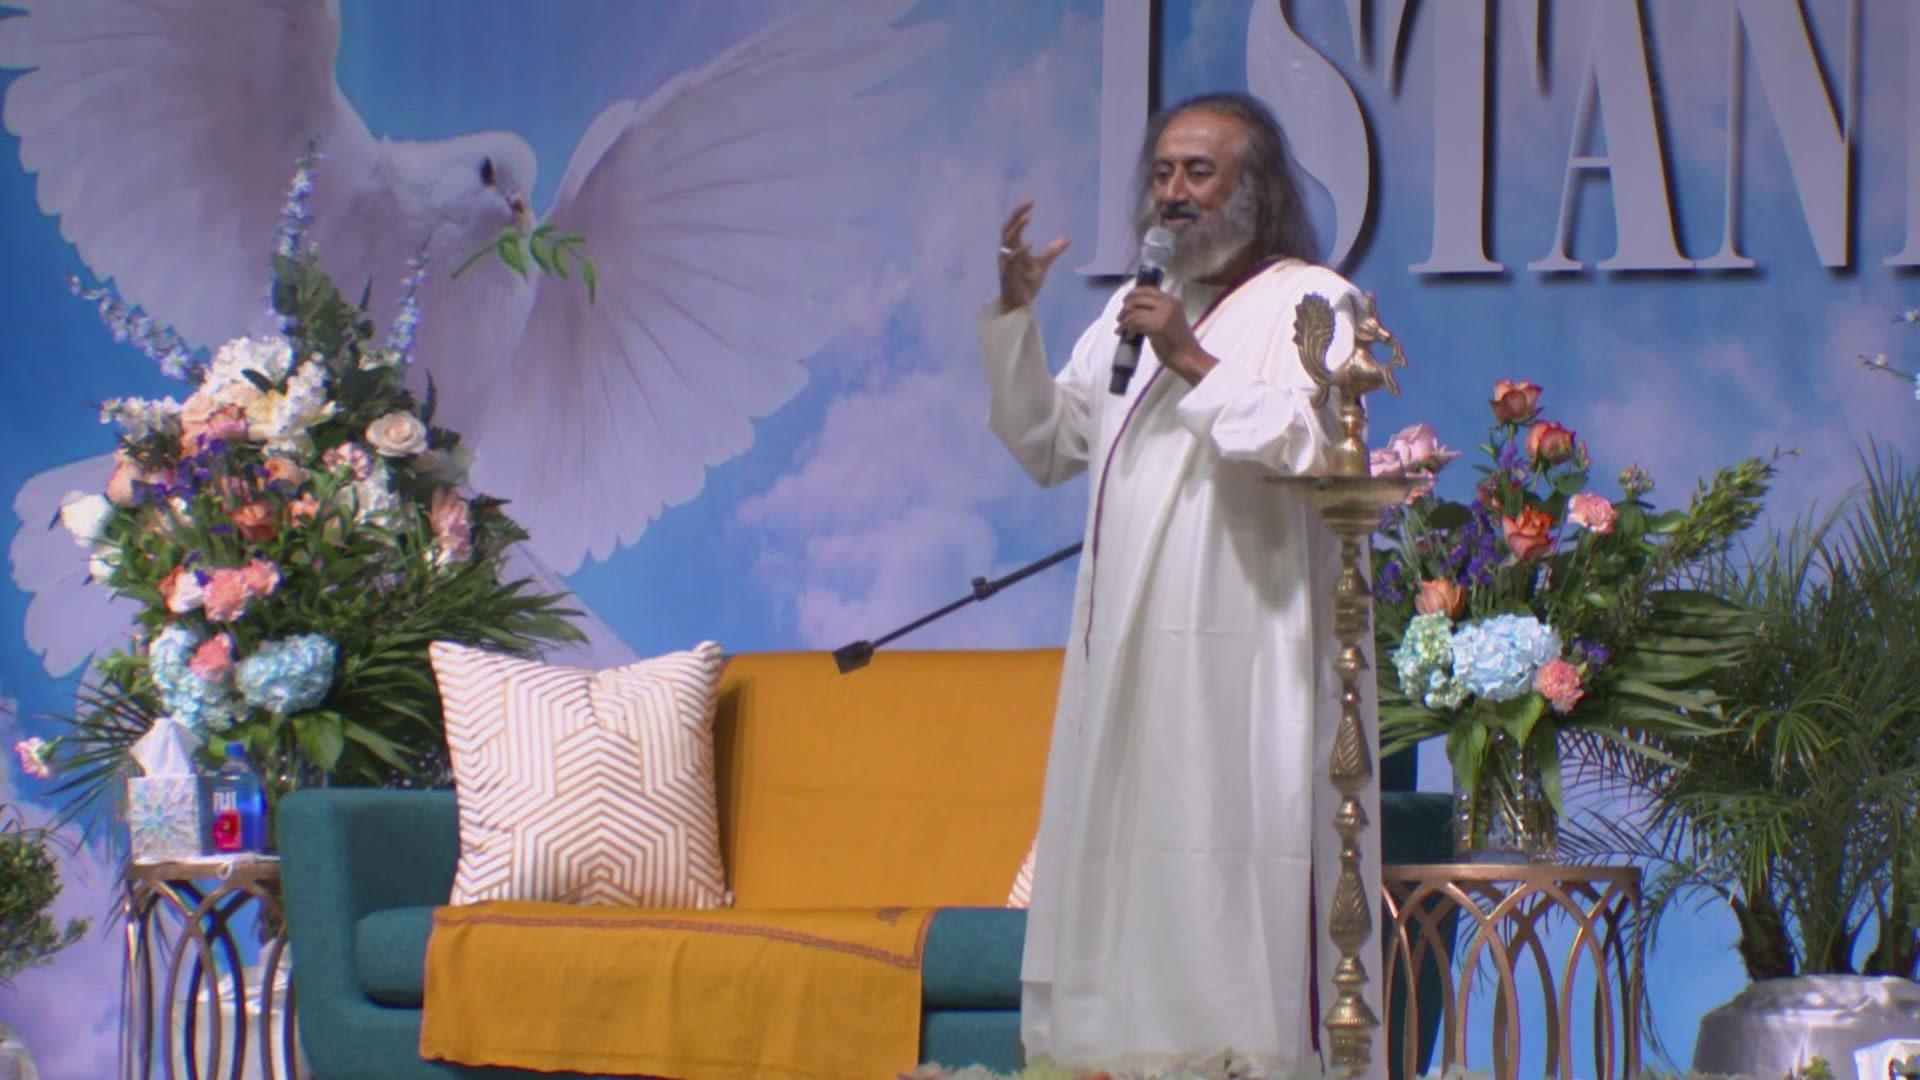 “Let’s be committed to non-violence, let’s see a stress free and non-violent society,” said Gurudev.